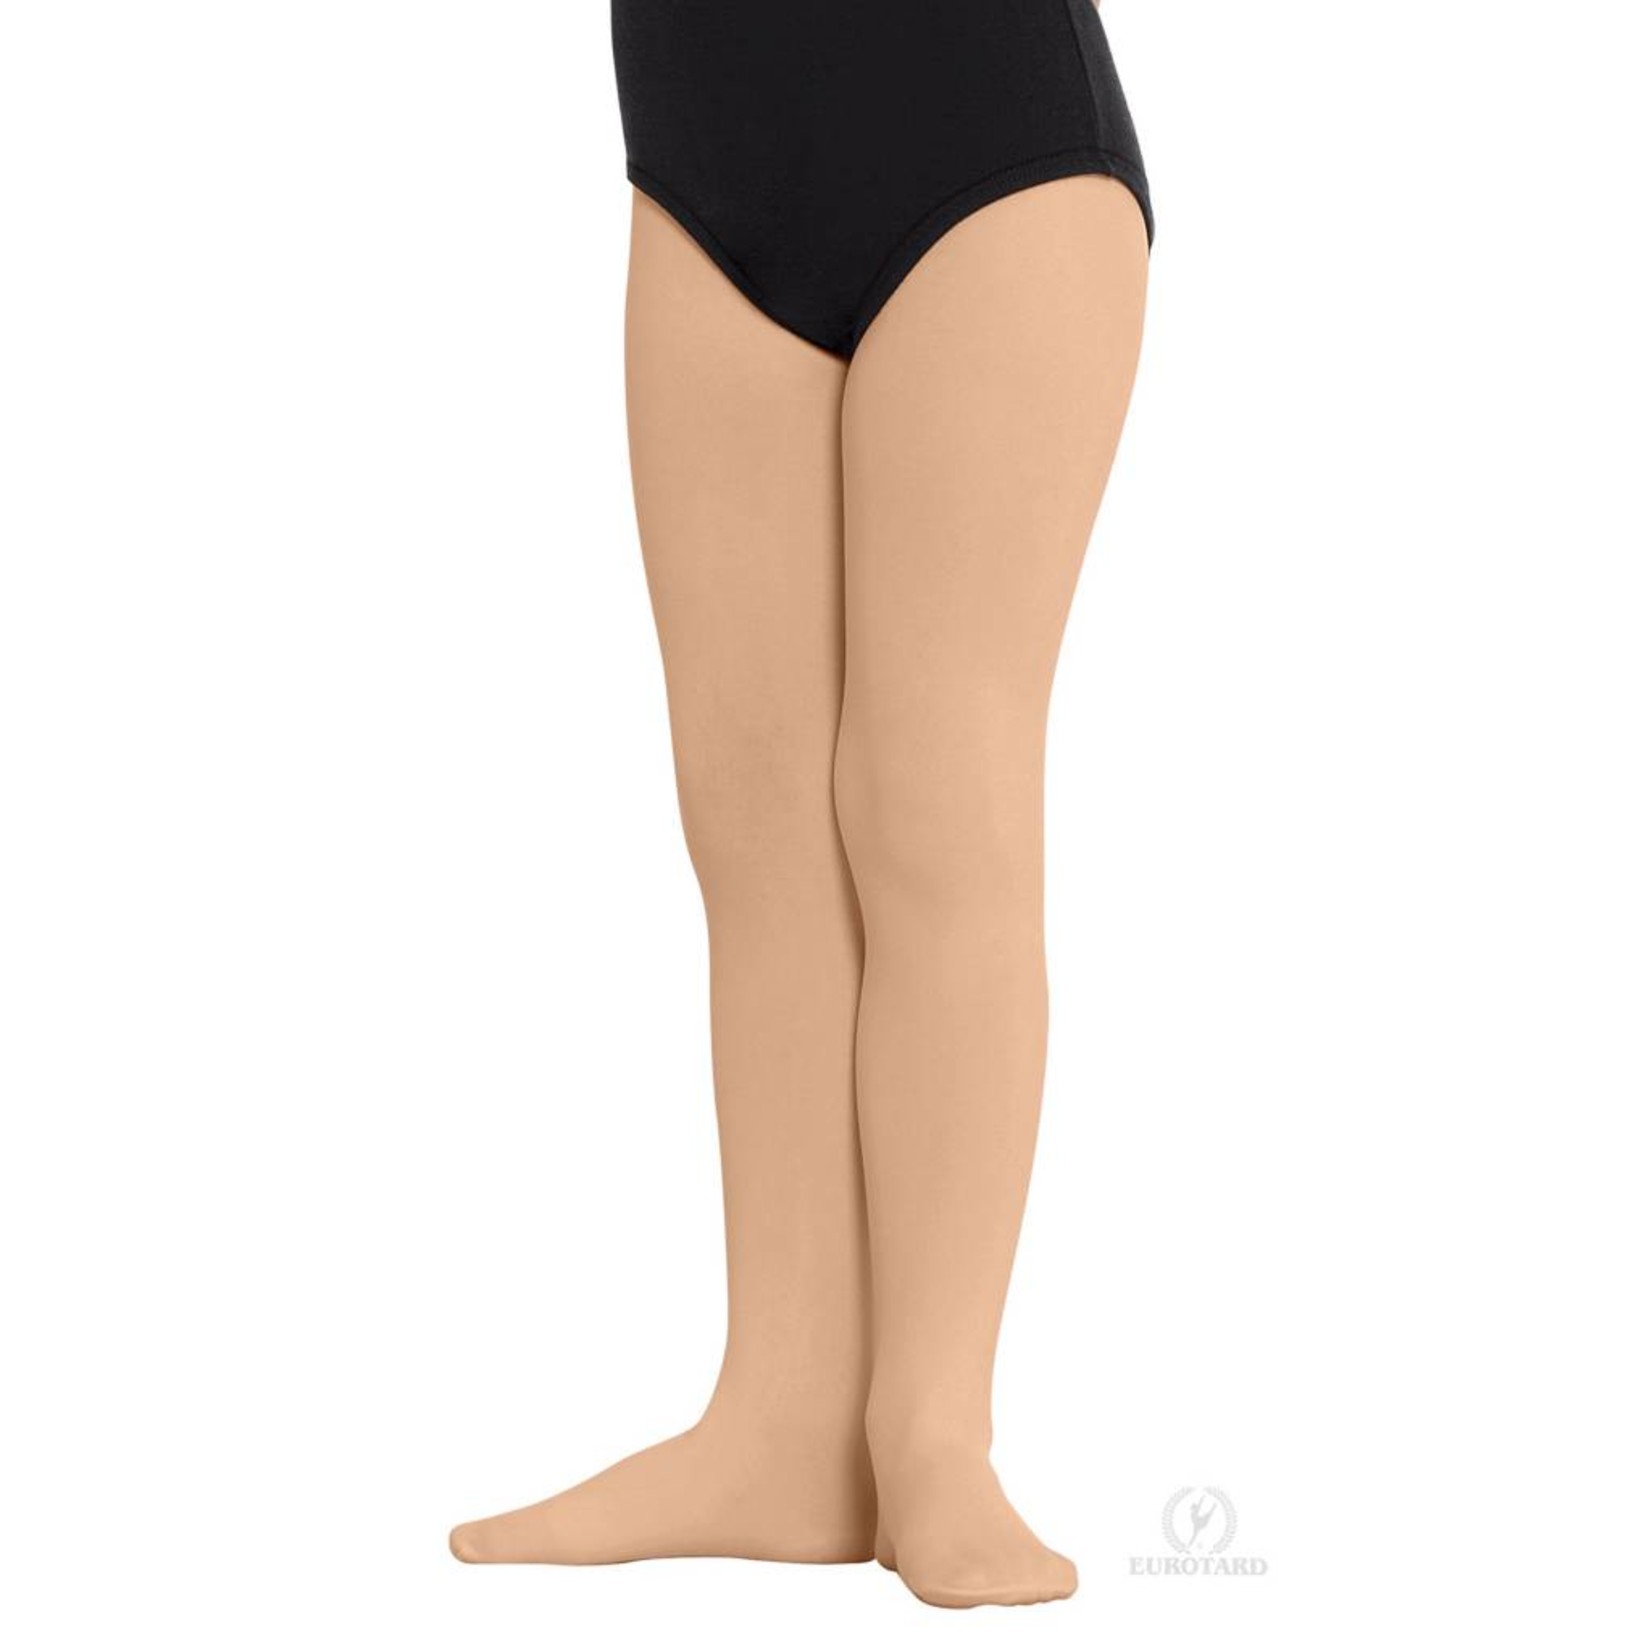 Kids Footed Tights, High Performance Tights